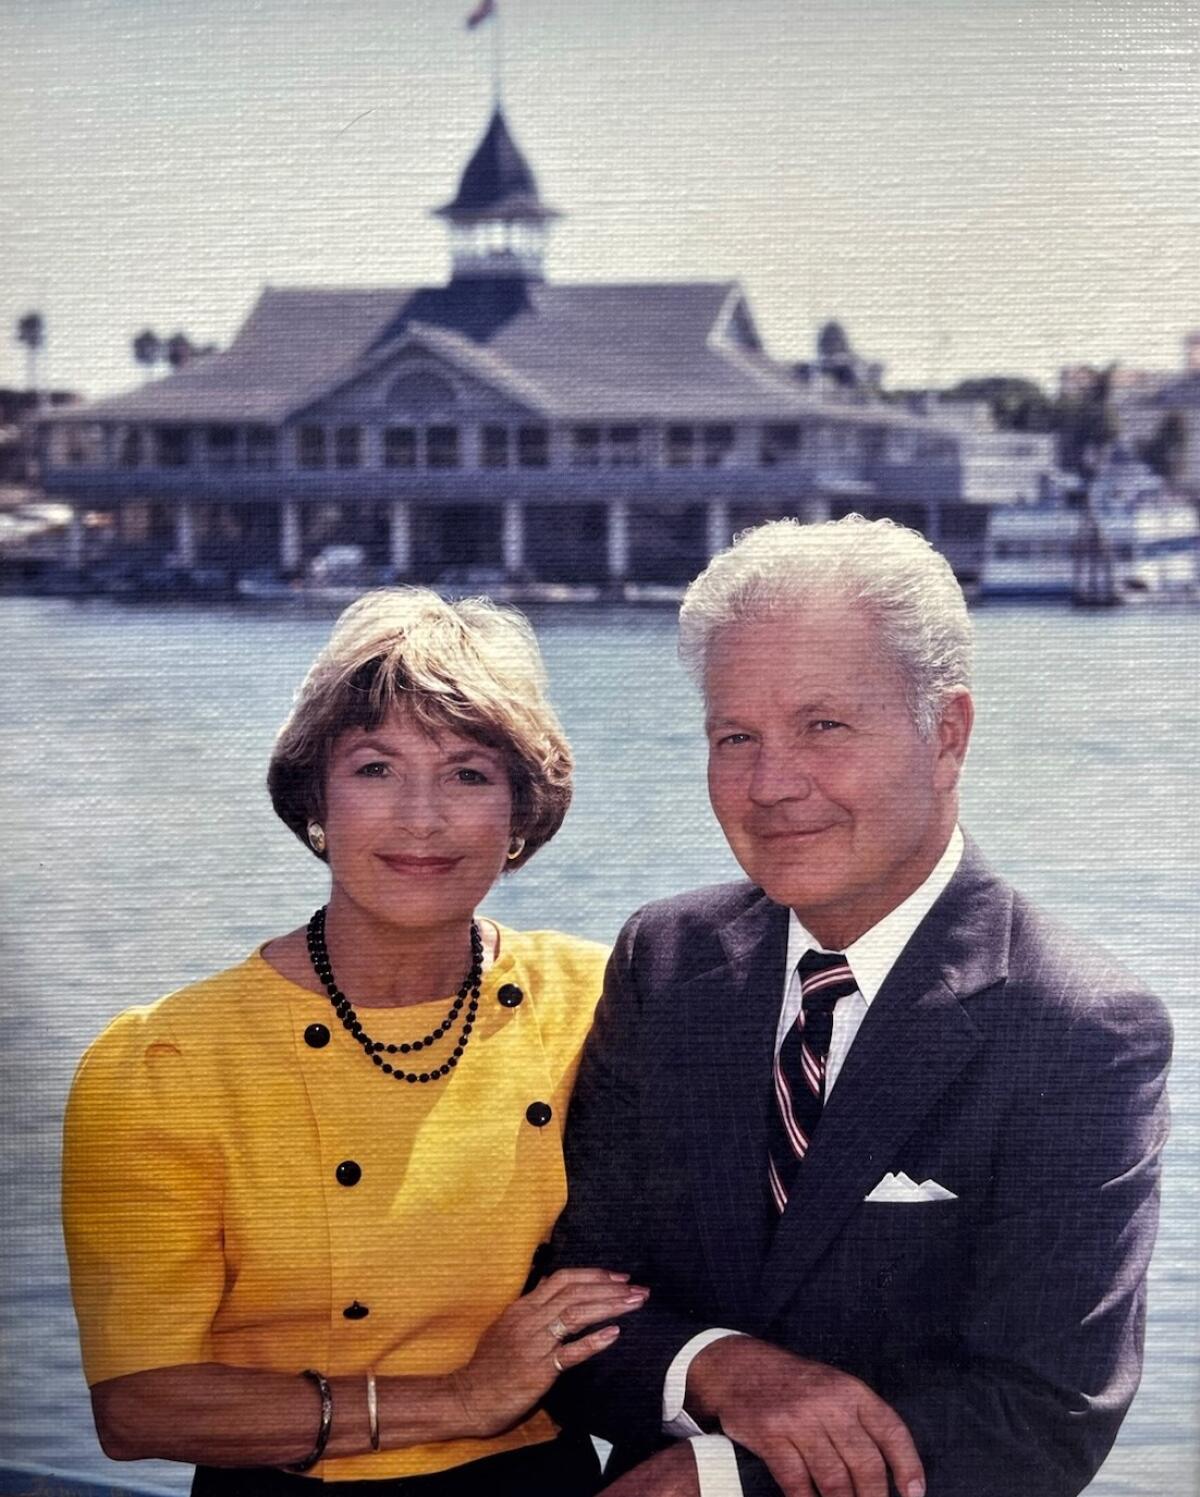 Patricia "Pat" Maurer with husband Philip in 1986.